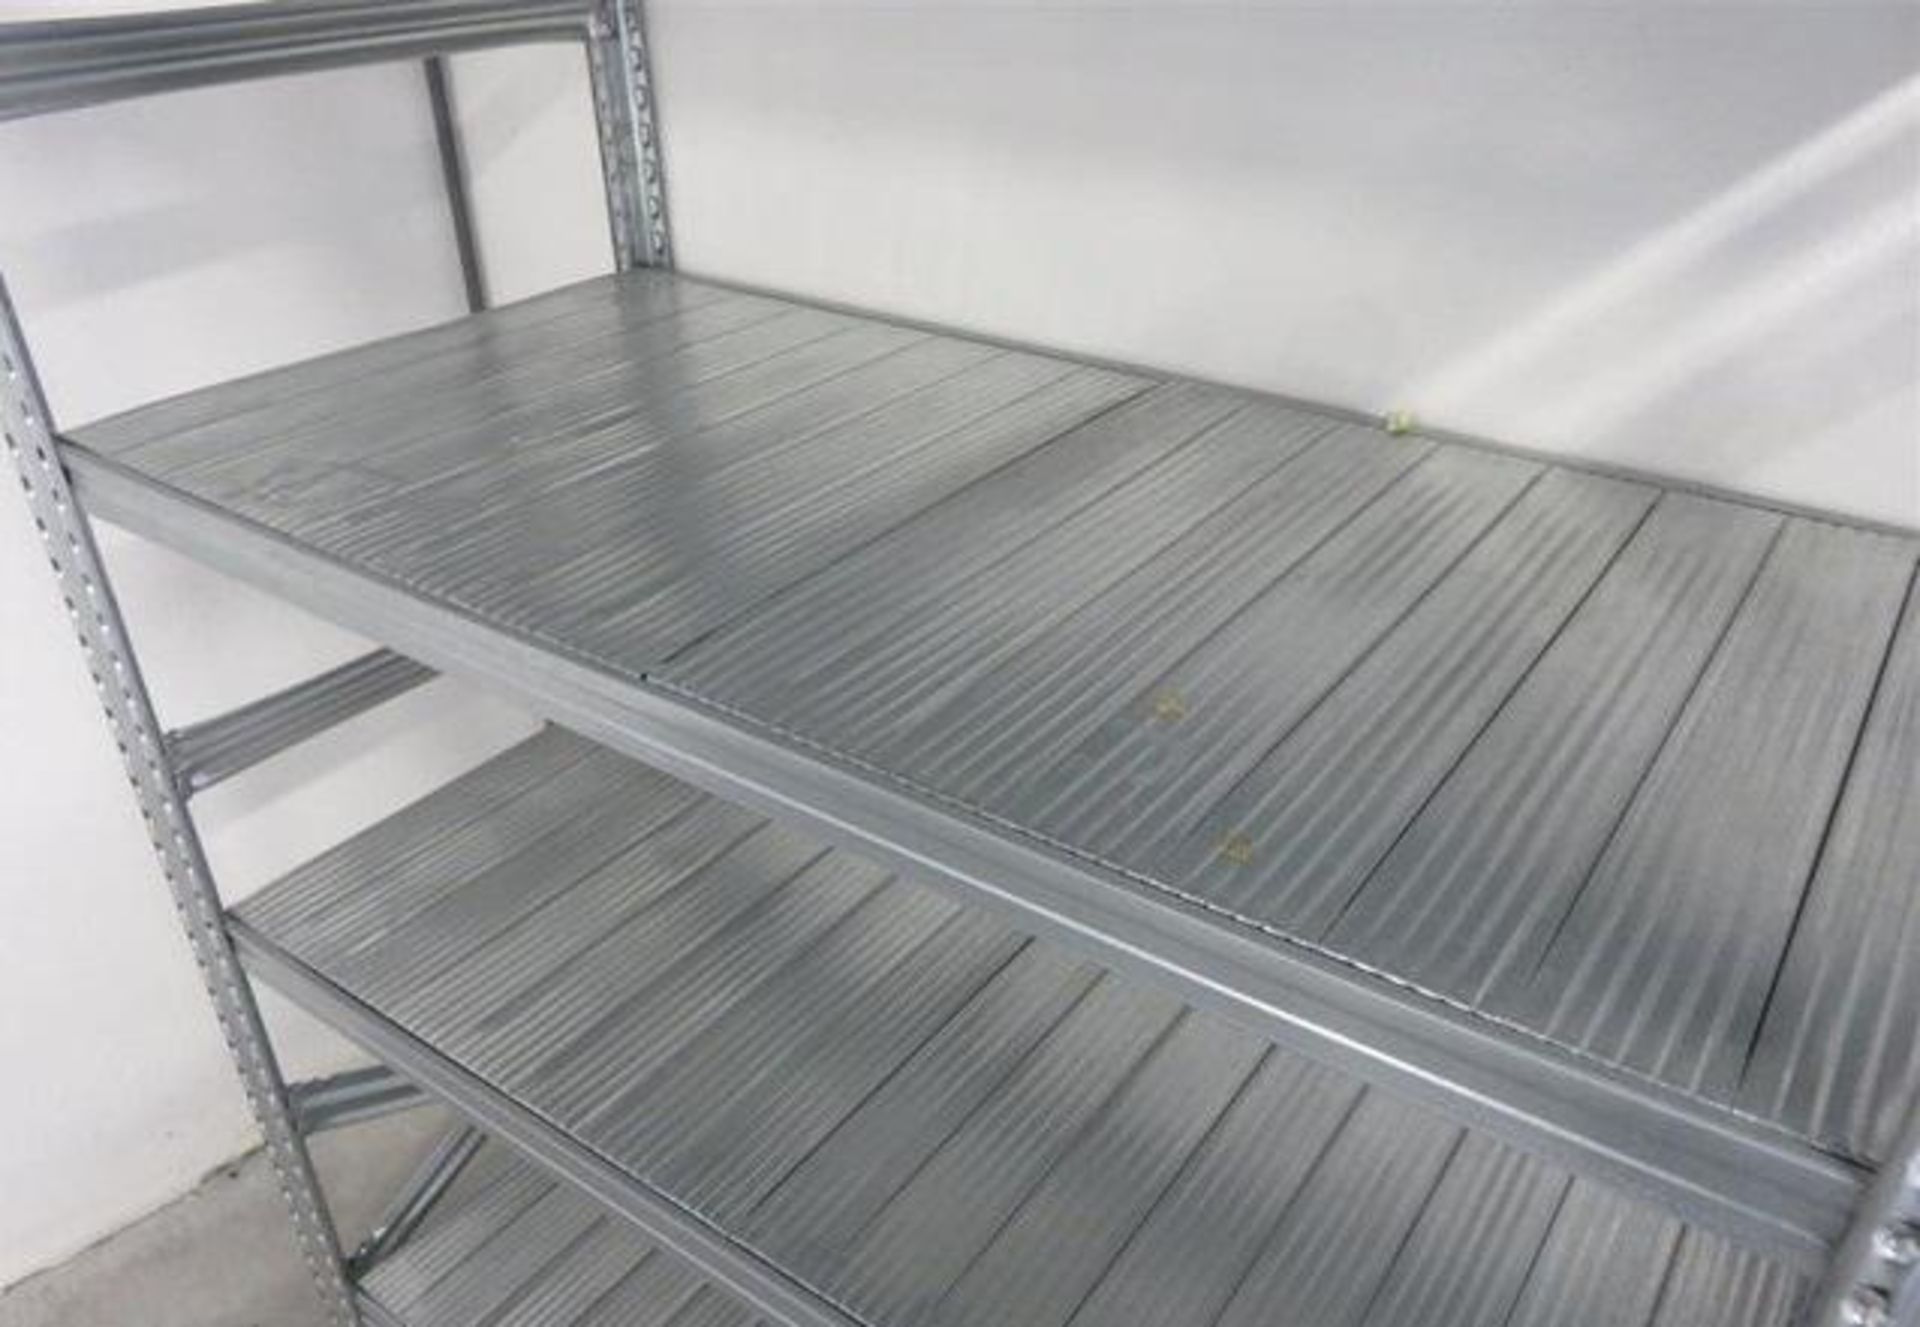 4 x Bays of Metalsistem Steel Modular Storage Shelving - Includes 37 Pieces - Recently Removed - Image 8 of 17